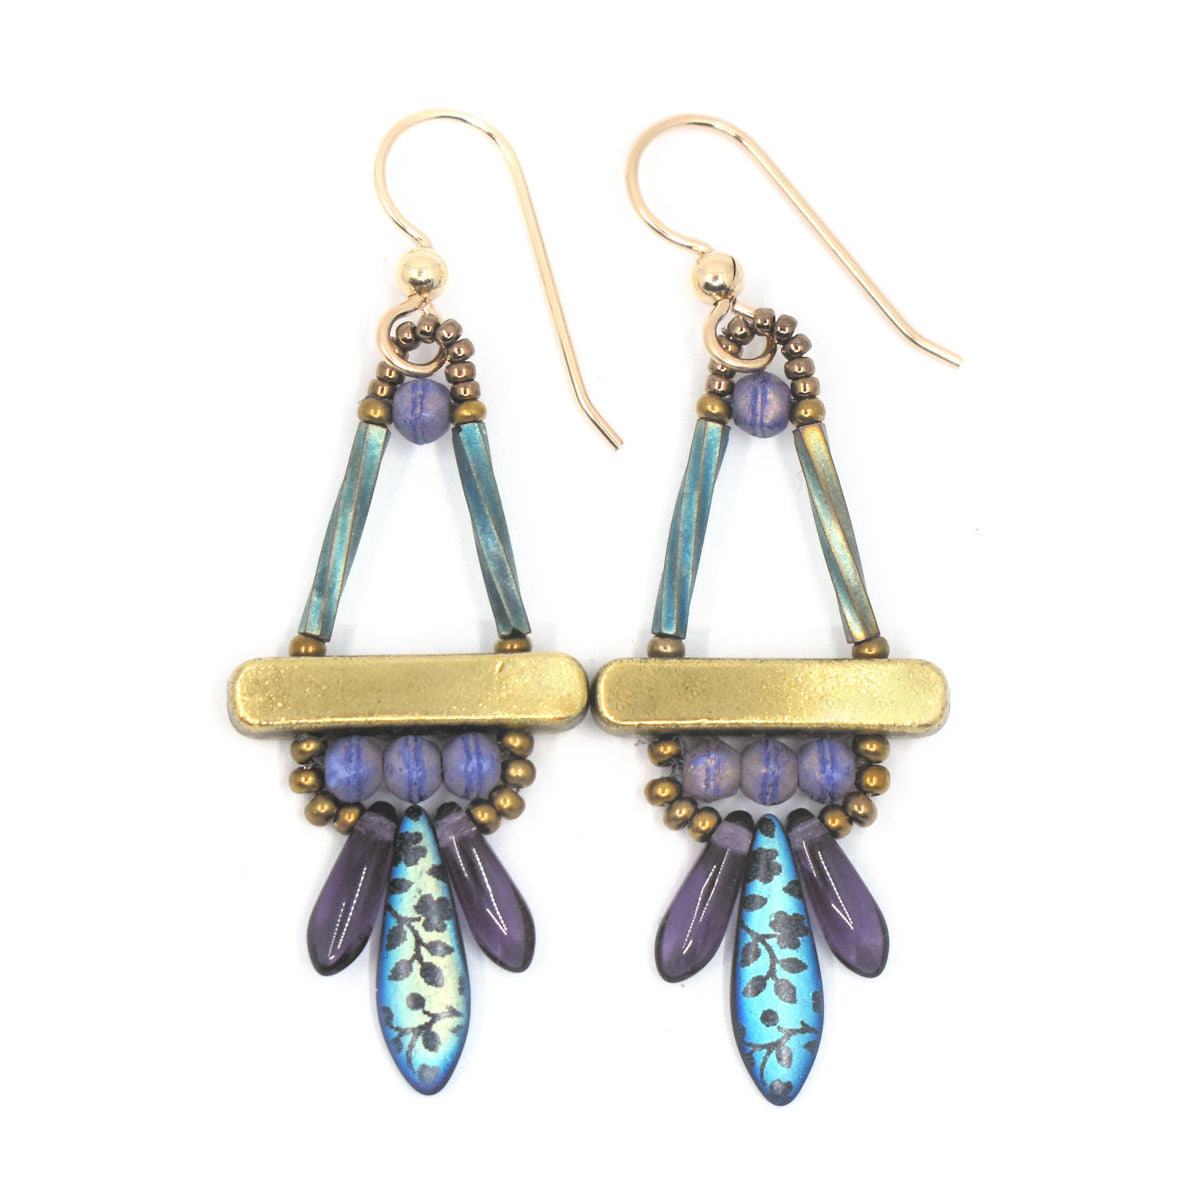 Purple and gold earrings laying on a white background. The earrings are a triangle shape on top, with a gold colored bar across the center. Below the bar there is a row of three purple beads and a lower row with one iridescent dagger bead with a flower print and a smaller clear purple dagger bead on each side of it.